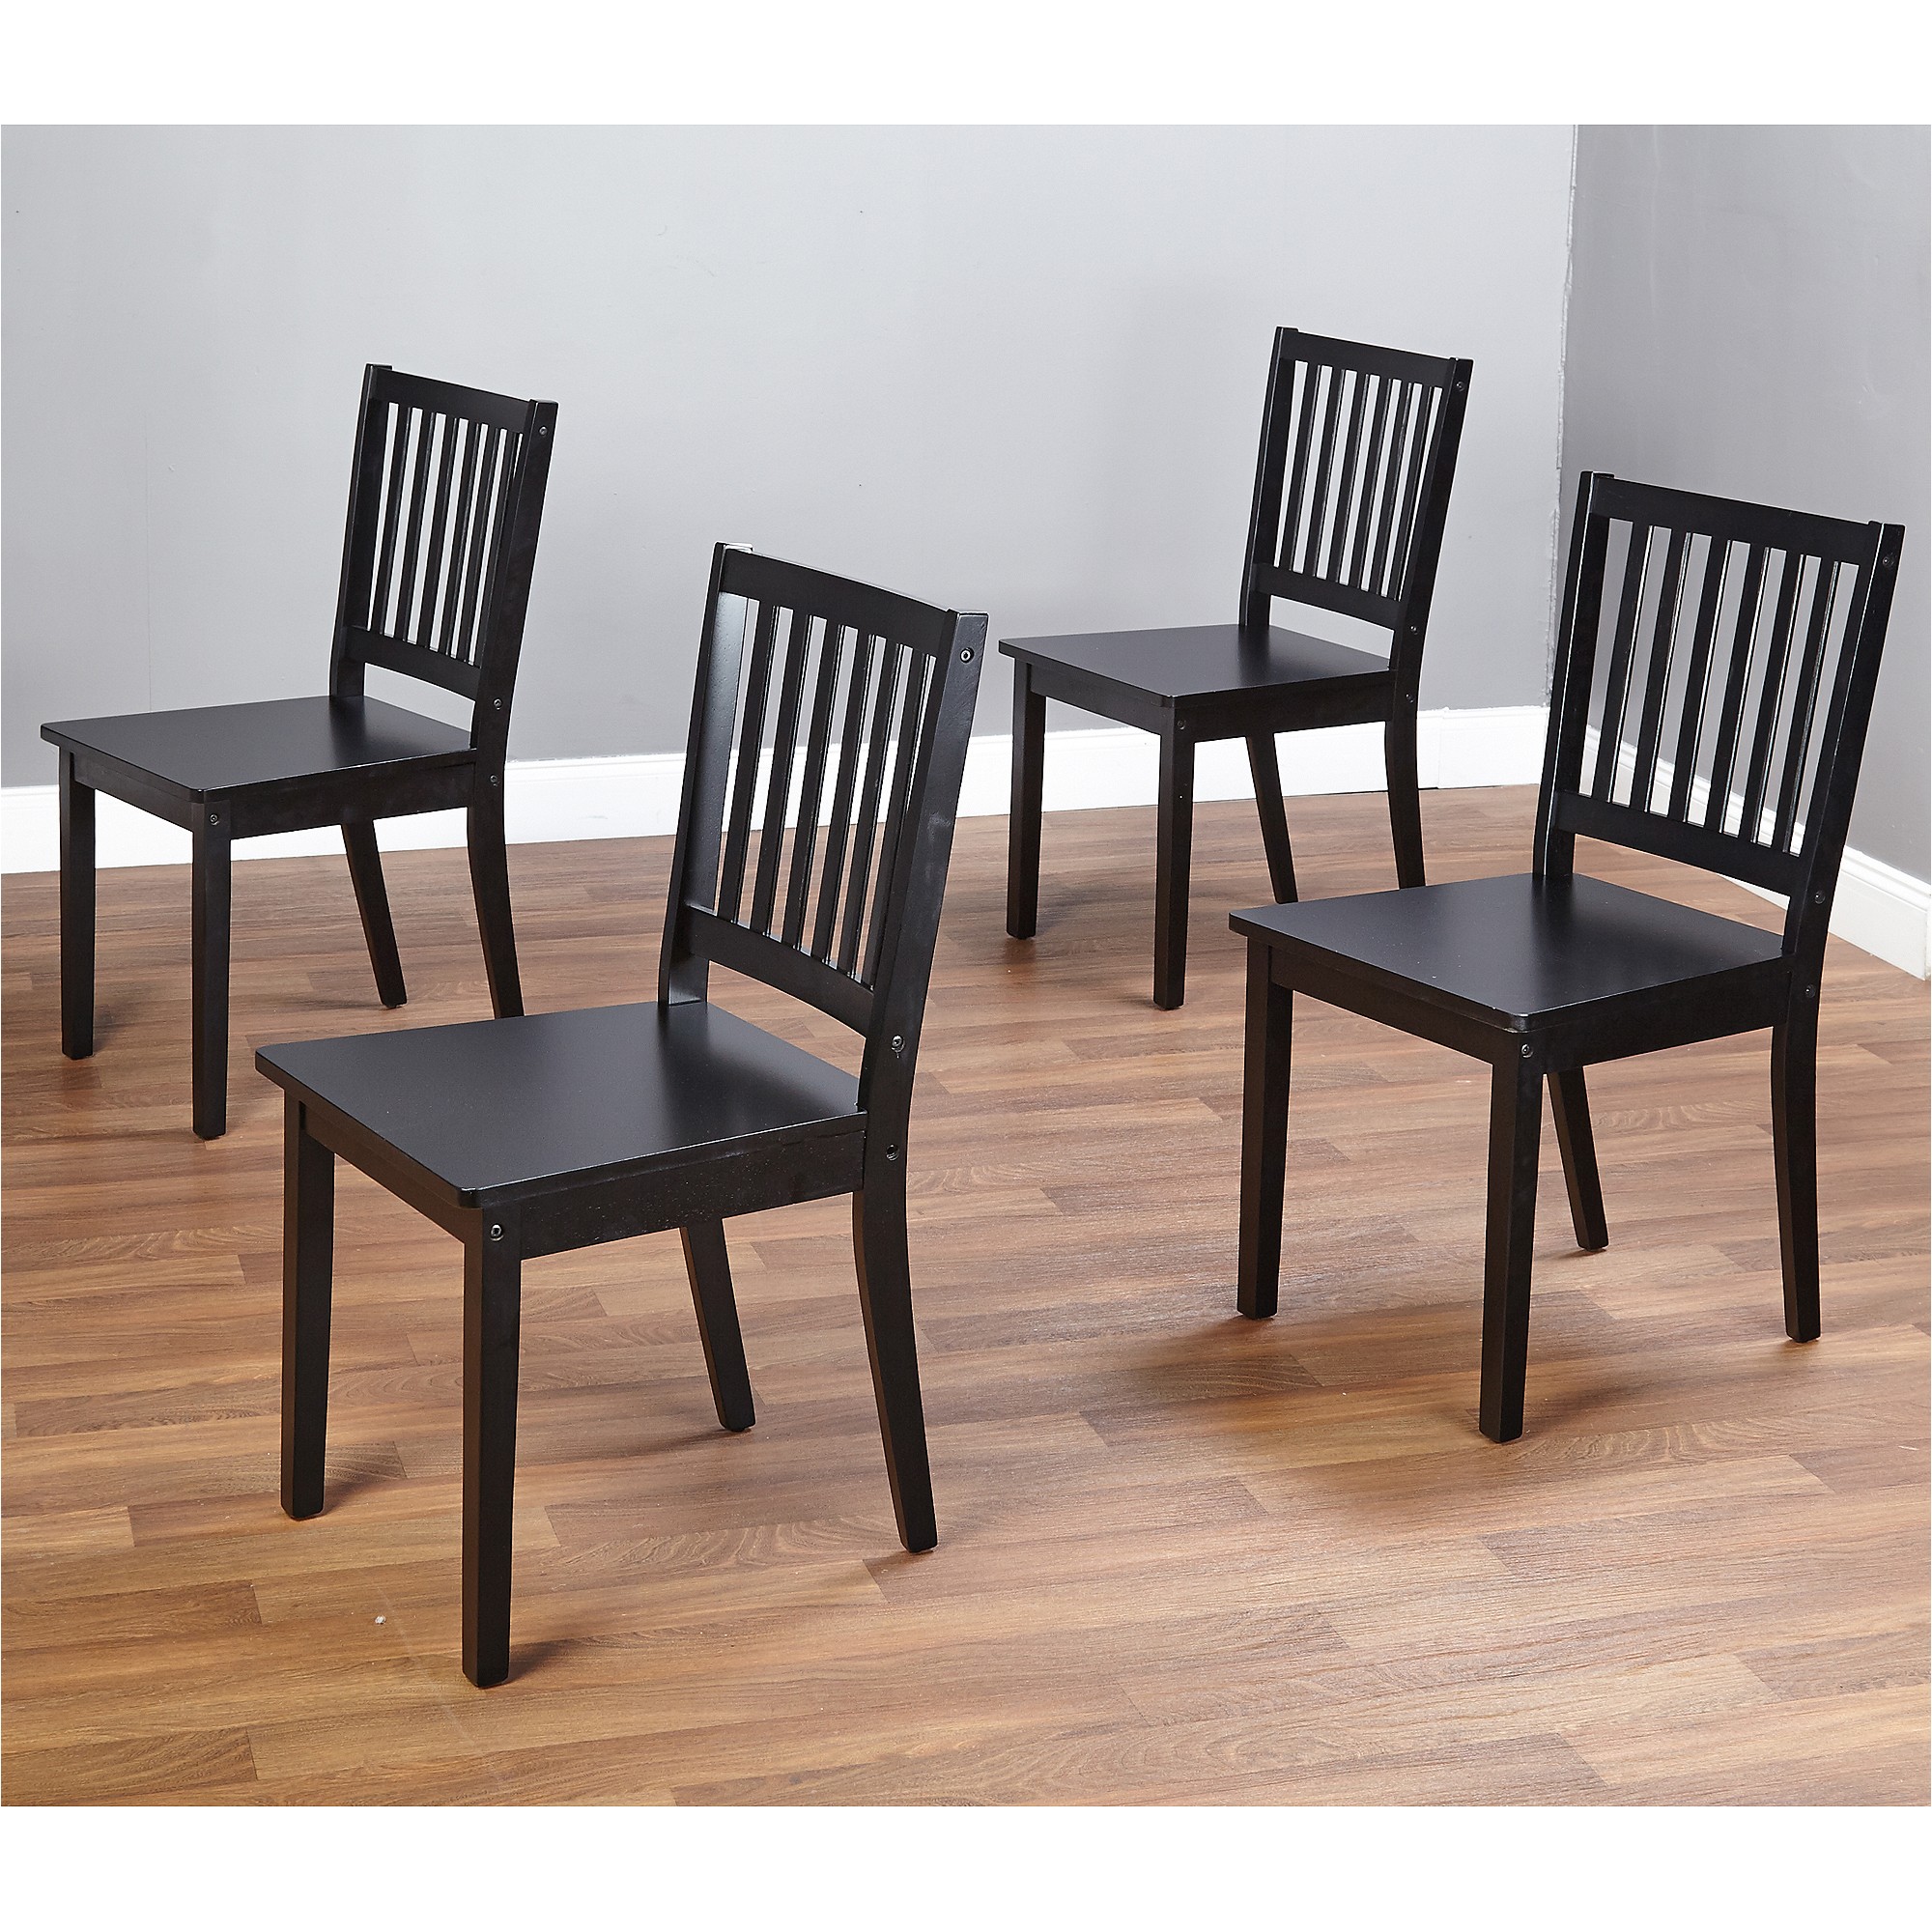 Dining Chairs Set Of 4 Shaker Dining Chairs Set Of 4 Espresso Walmart Com